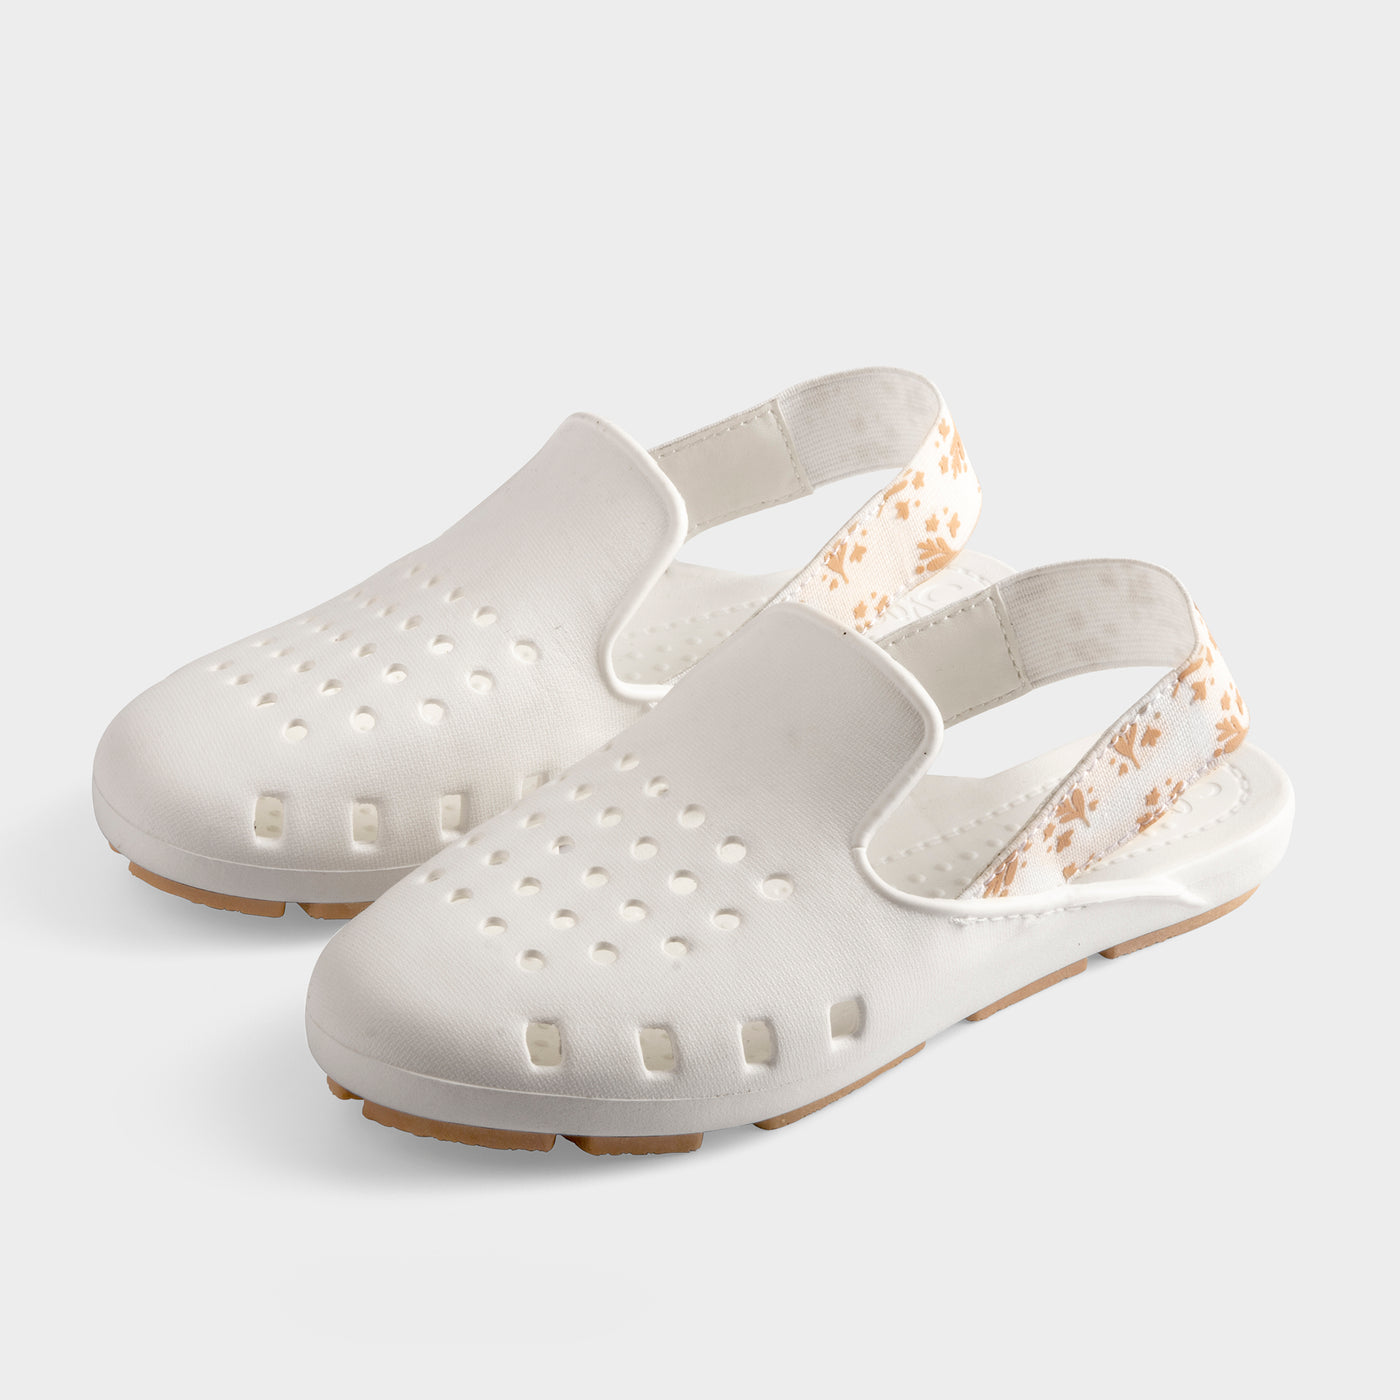 Girls womens white slide sandals. floral flat slingbacks. water shoe from toddlers to teens